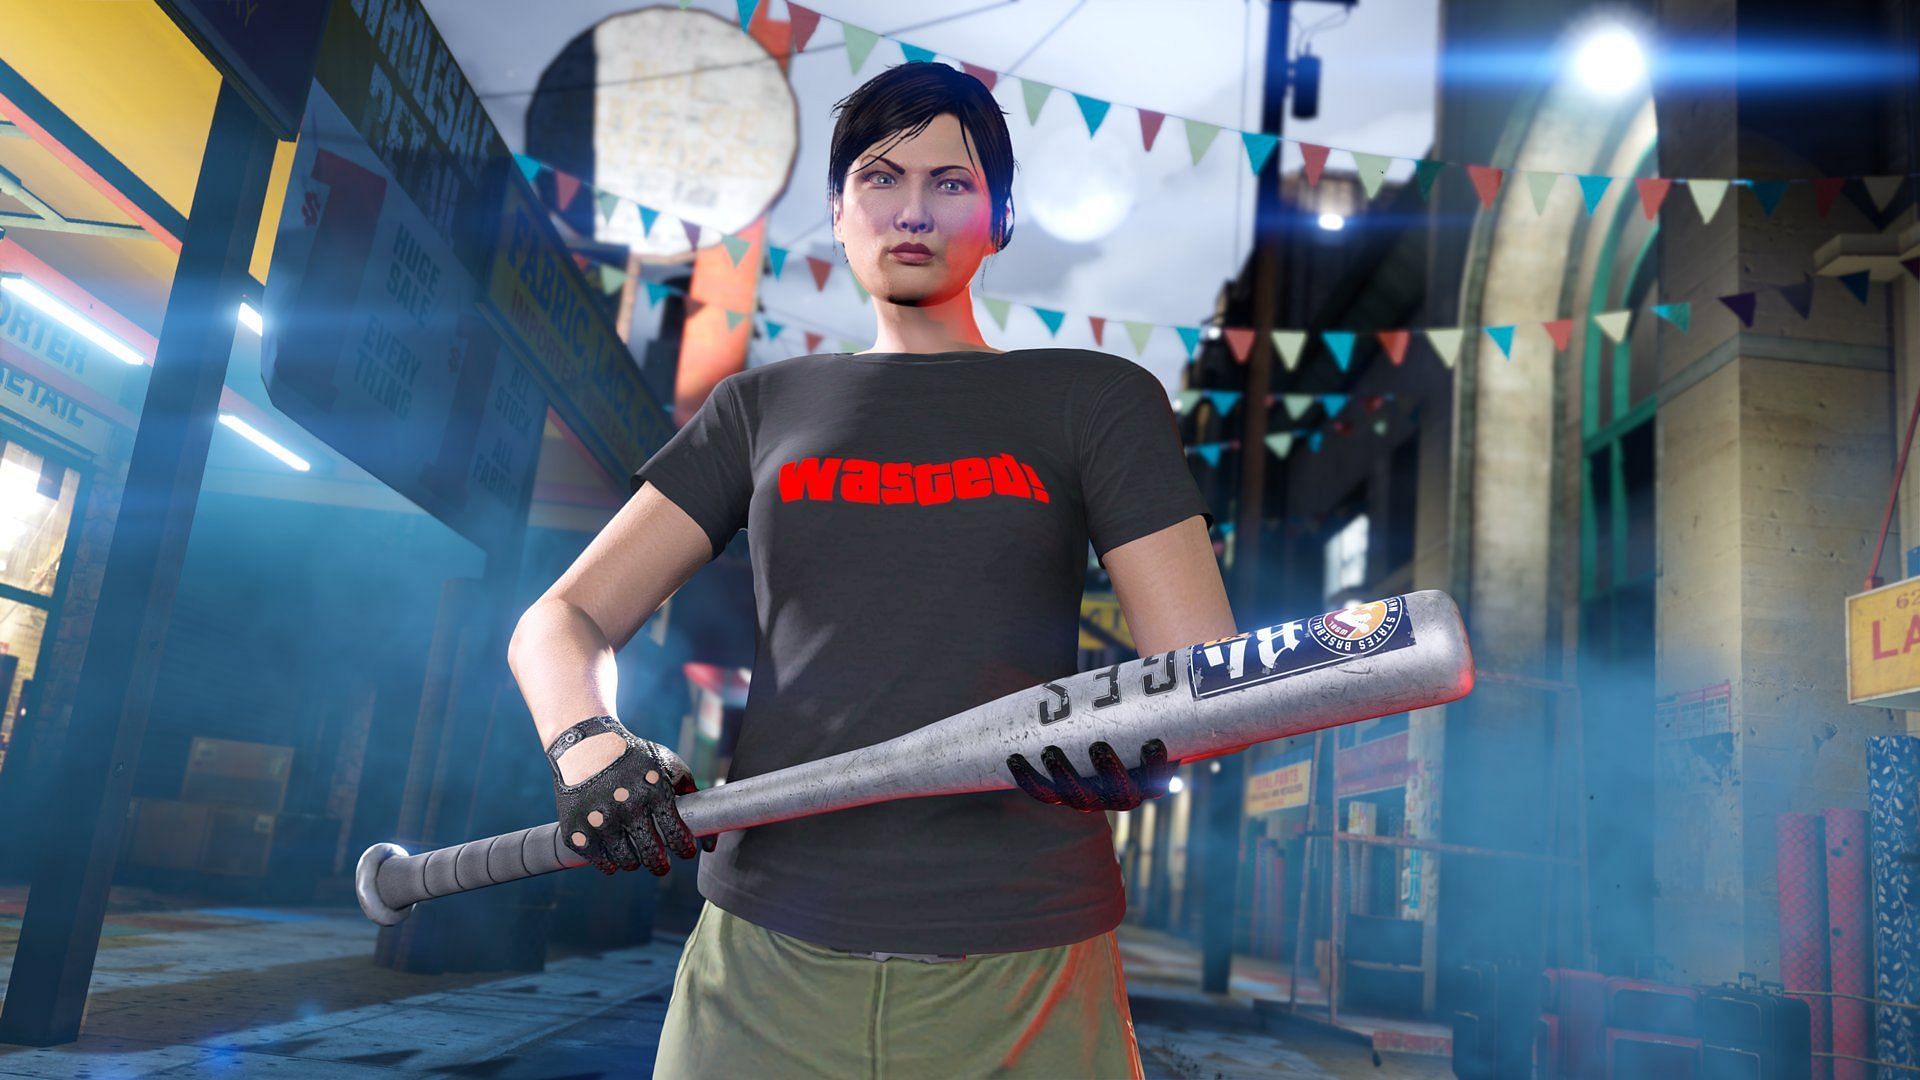 Rockstar celebrates the release of GTA Trilogy by gifting the Wasted Tee in GTA Online (Image via Rockstar Games)